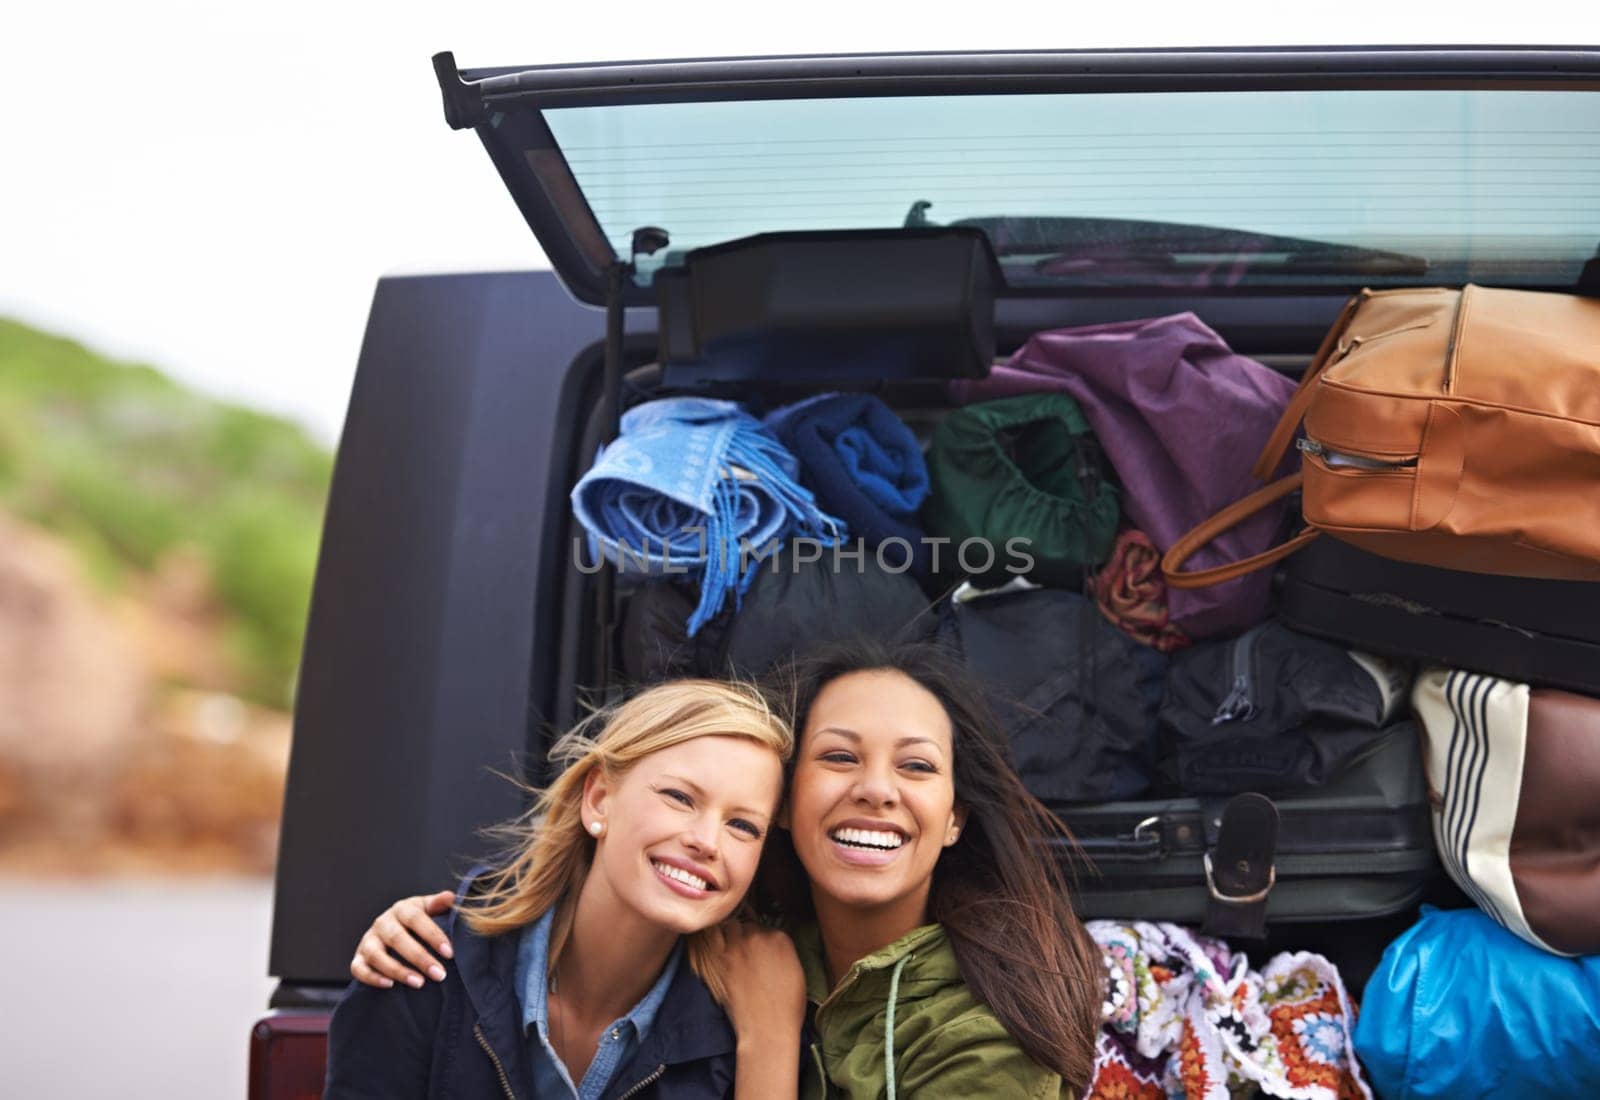 Women, friends and portrait on road trip with luggage in nature for camping holiday, vacation or explore. Female person, smile and car boot with bags for European adventure, transportation or journey.